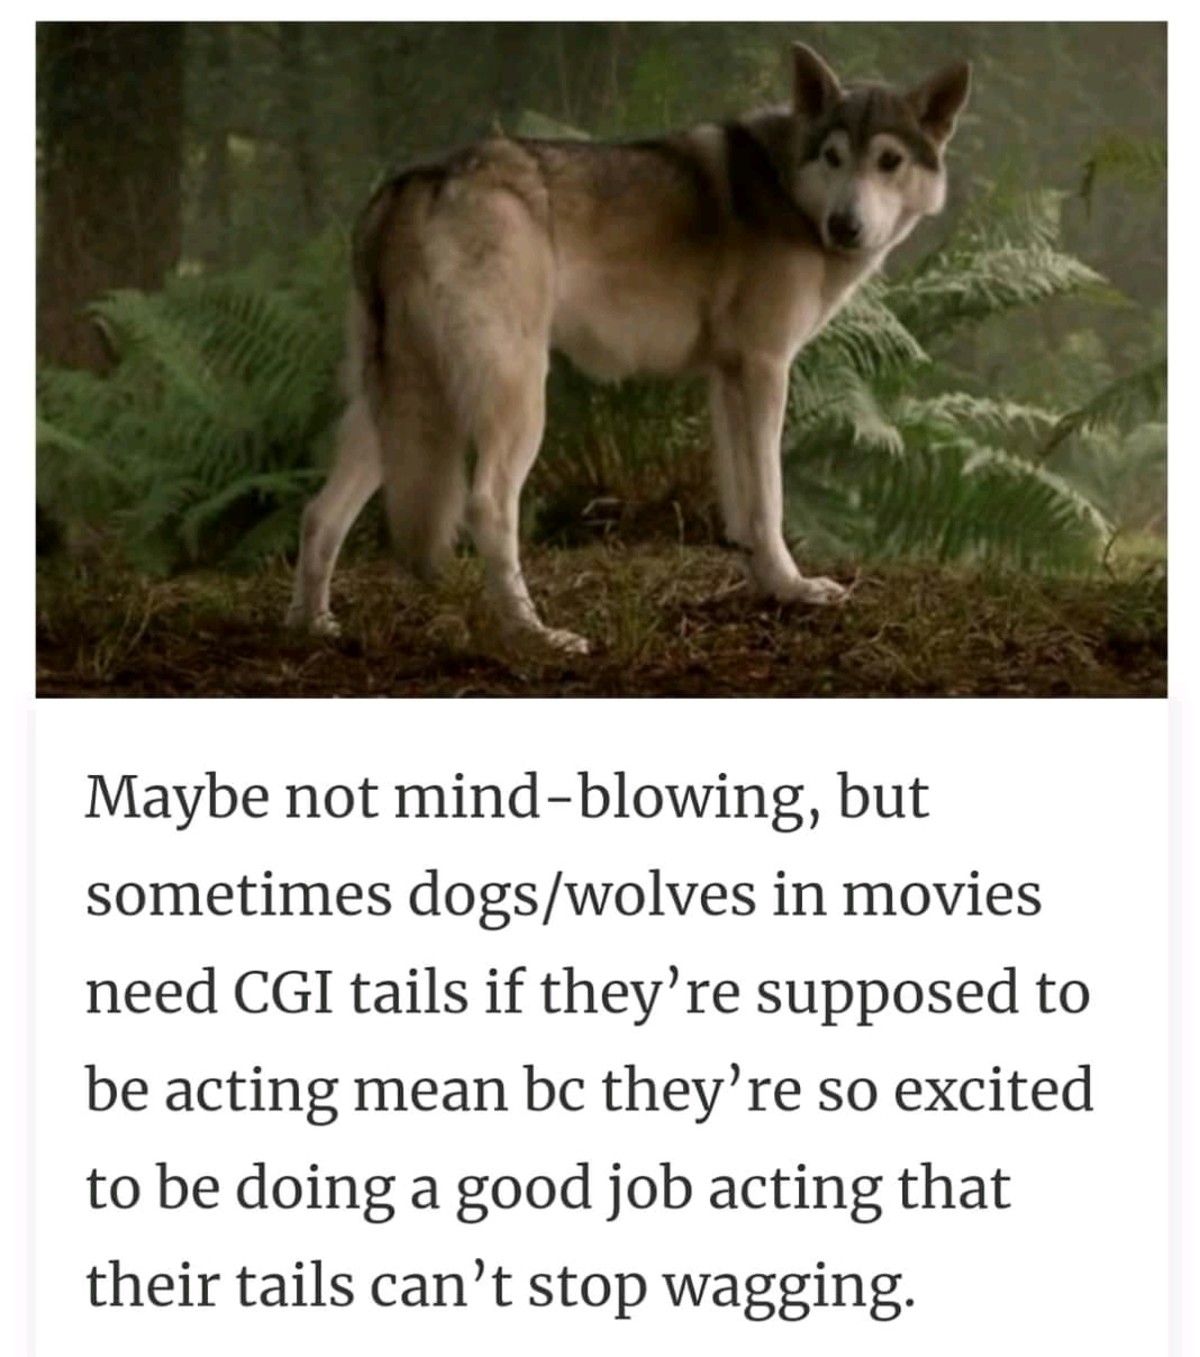 Game of Thrones - Maybe not mindblowing, but sometimes dogswolves in movies need Cgi tails if they're supposed to be acting mean bc they're so excited to be doing a good job acting that their tails can't stop wagging.